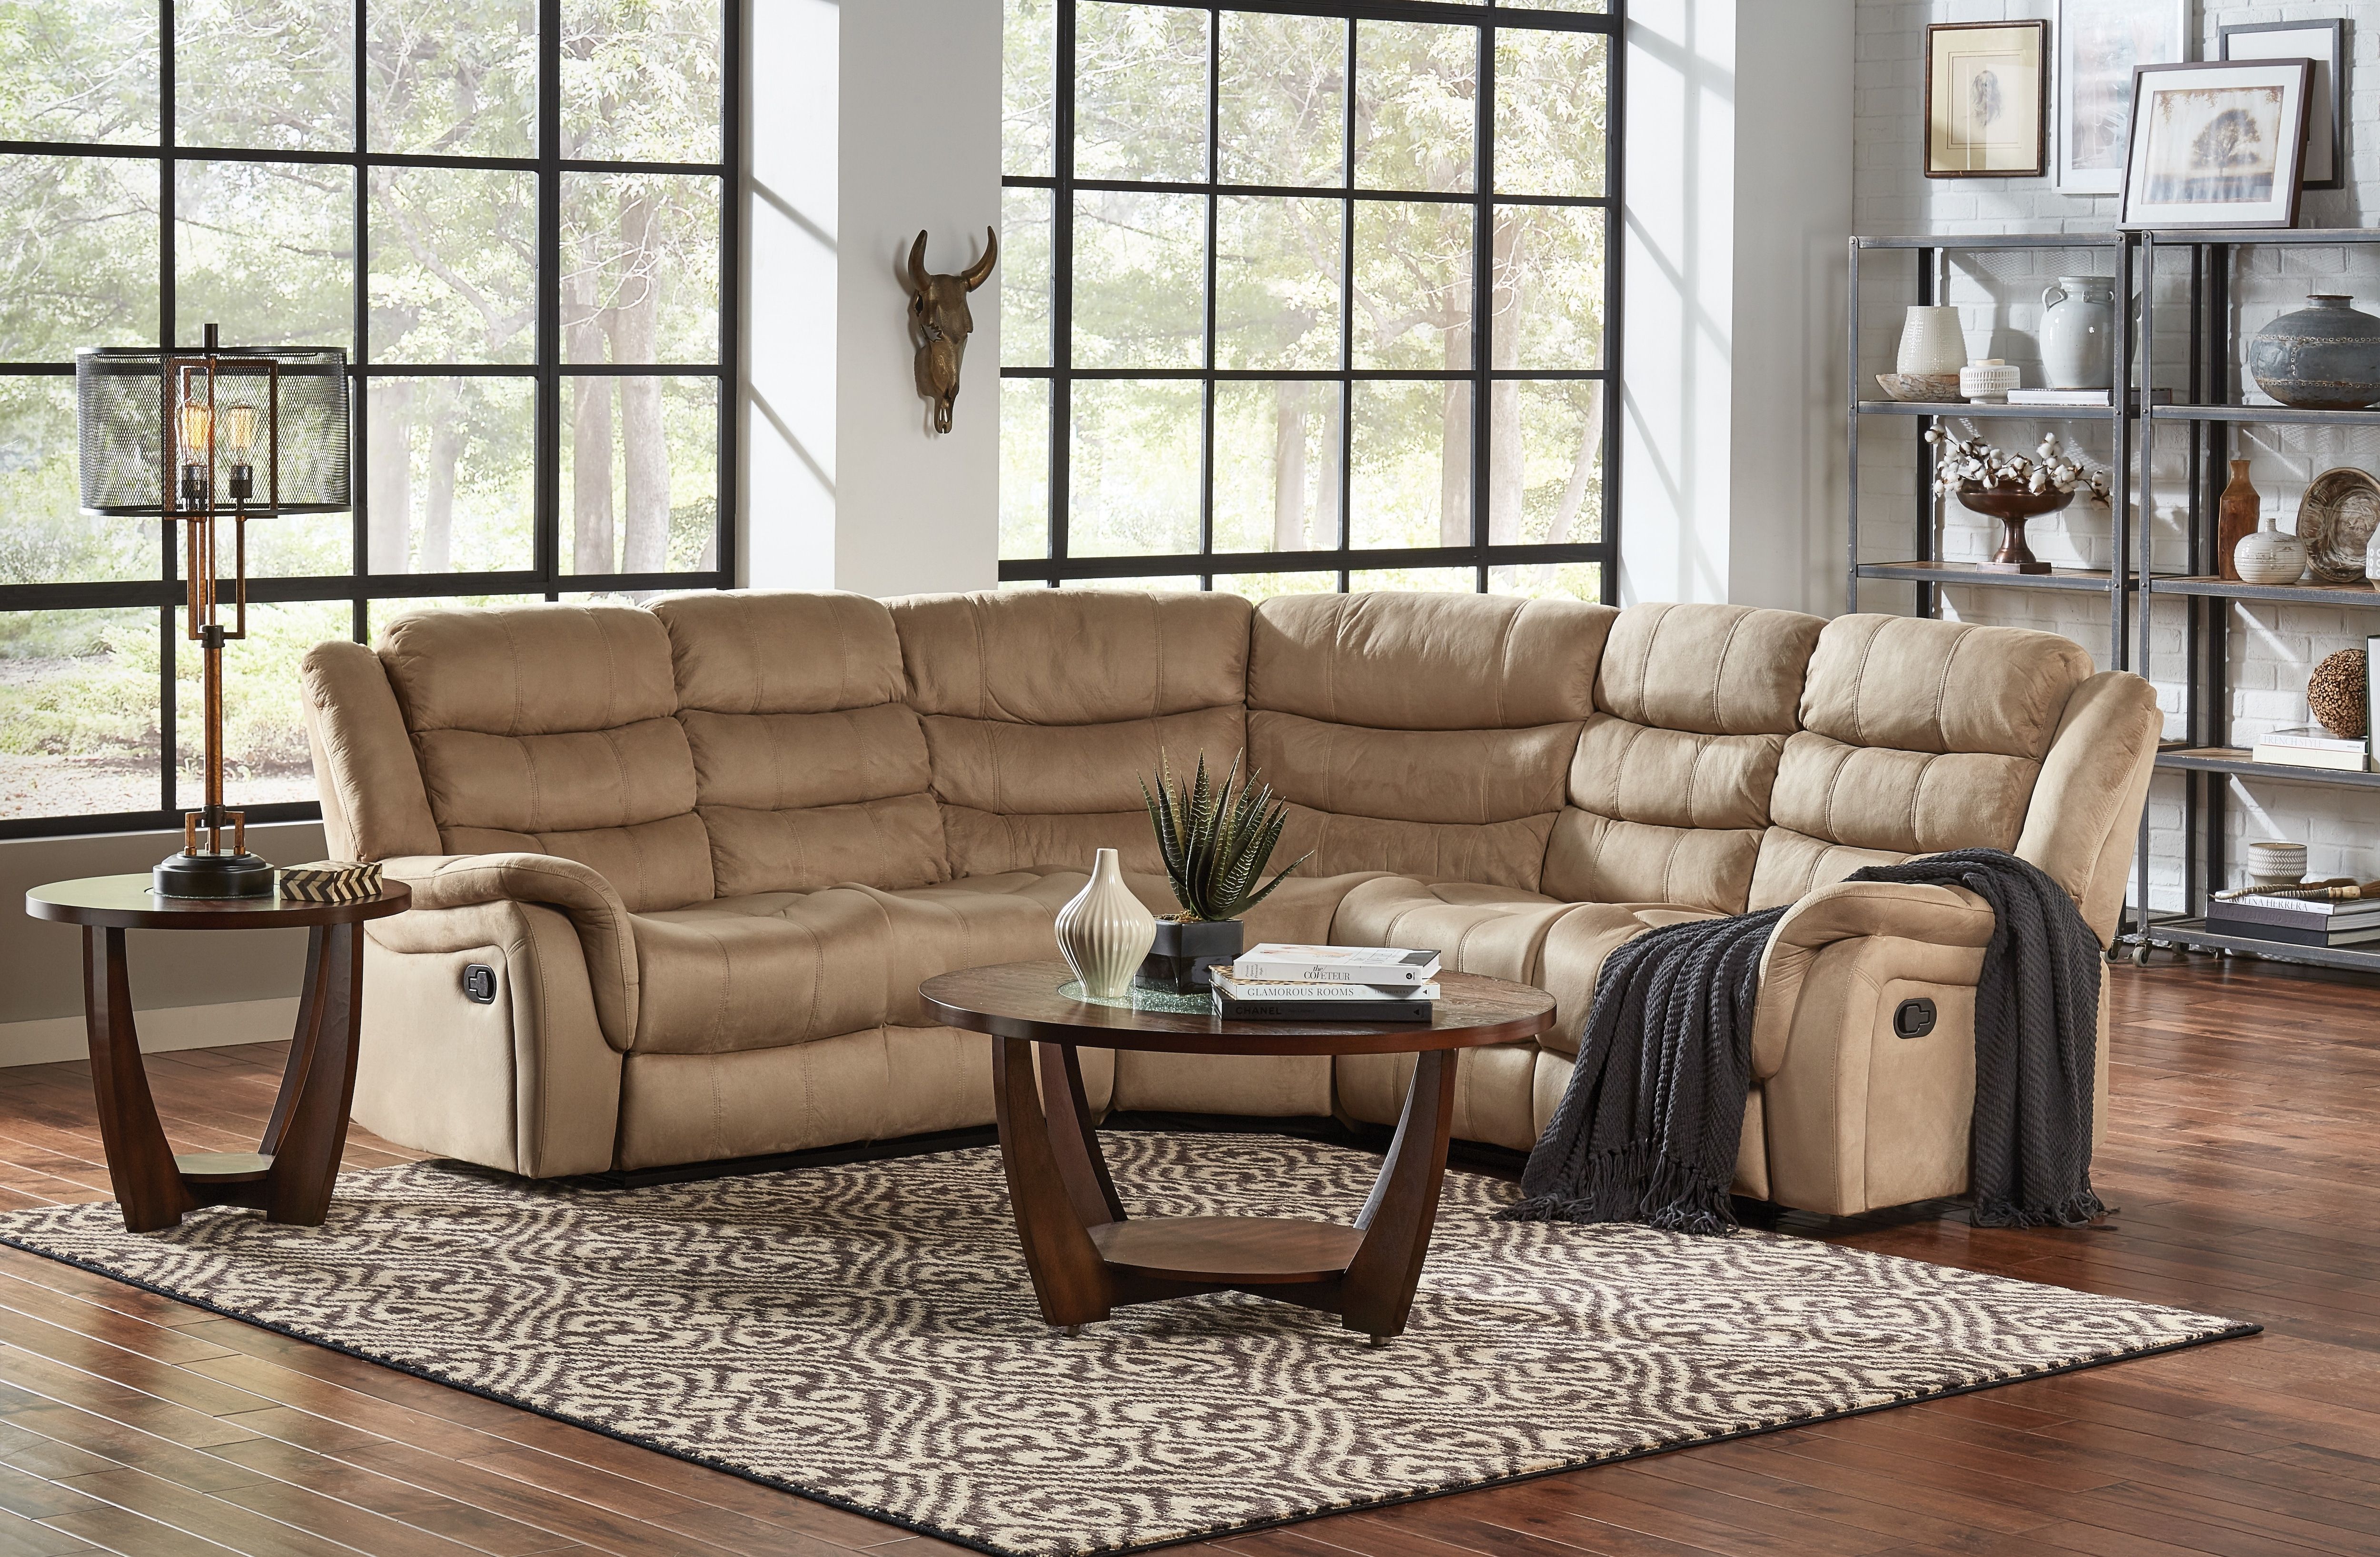 Benton 3pc Reclining Sectional | With Regard To Benton 4 Piece Sectionals (View 8 of 30)